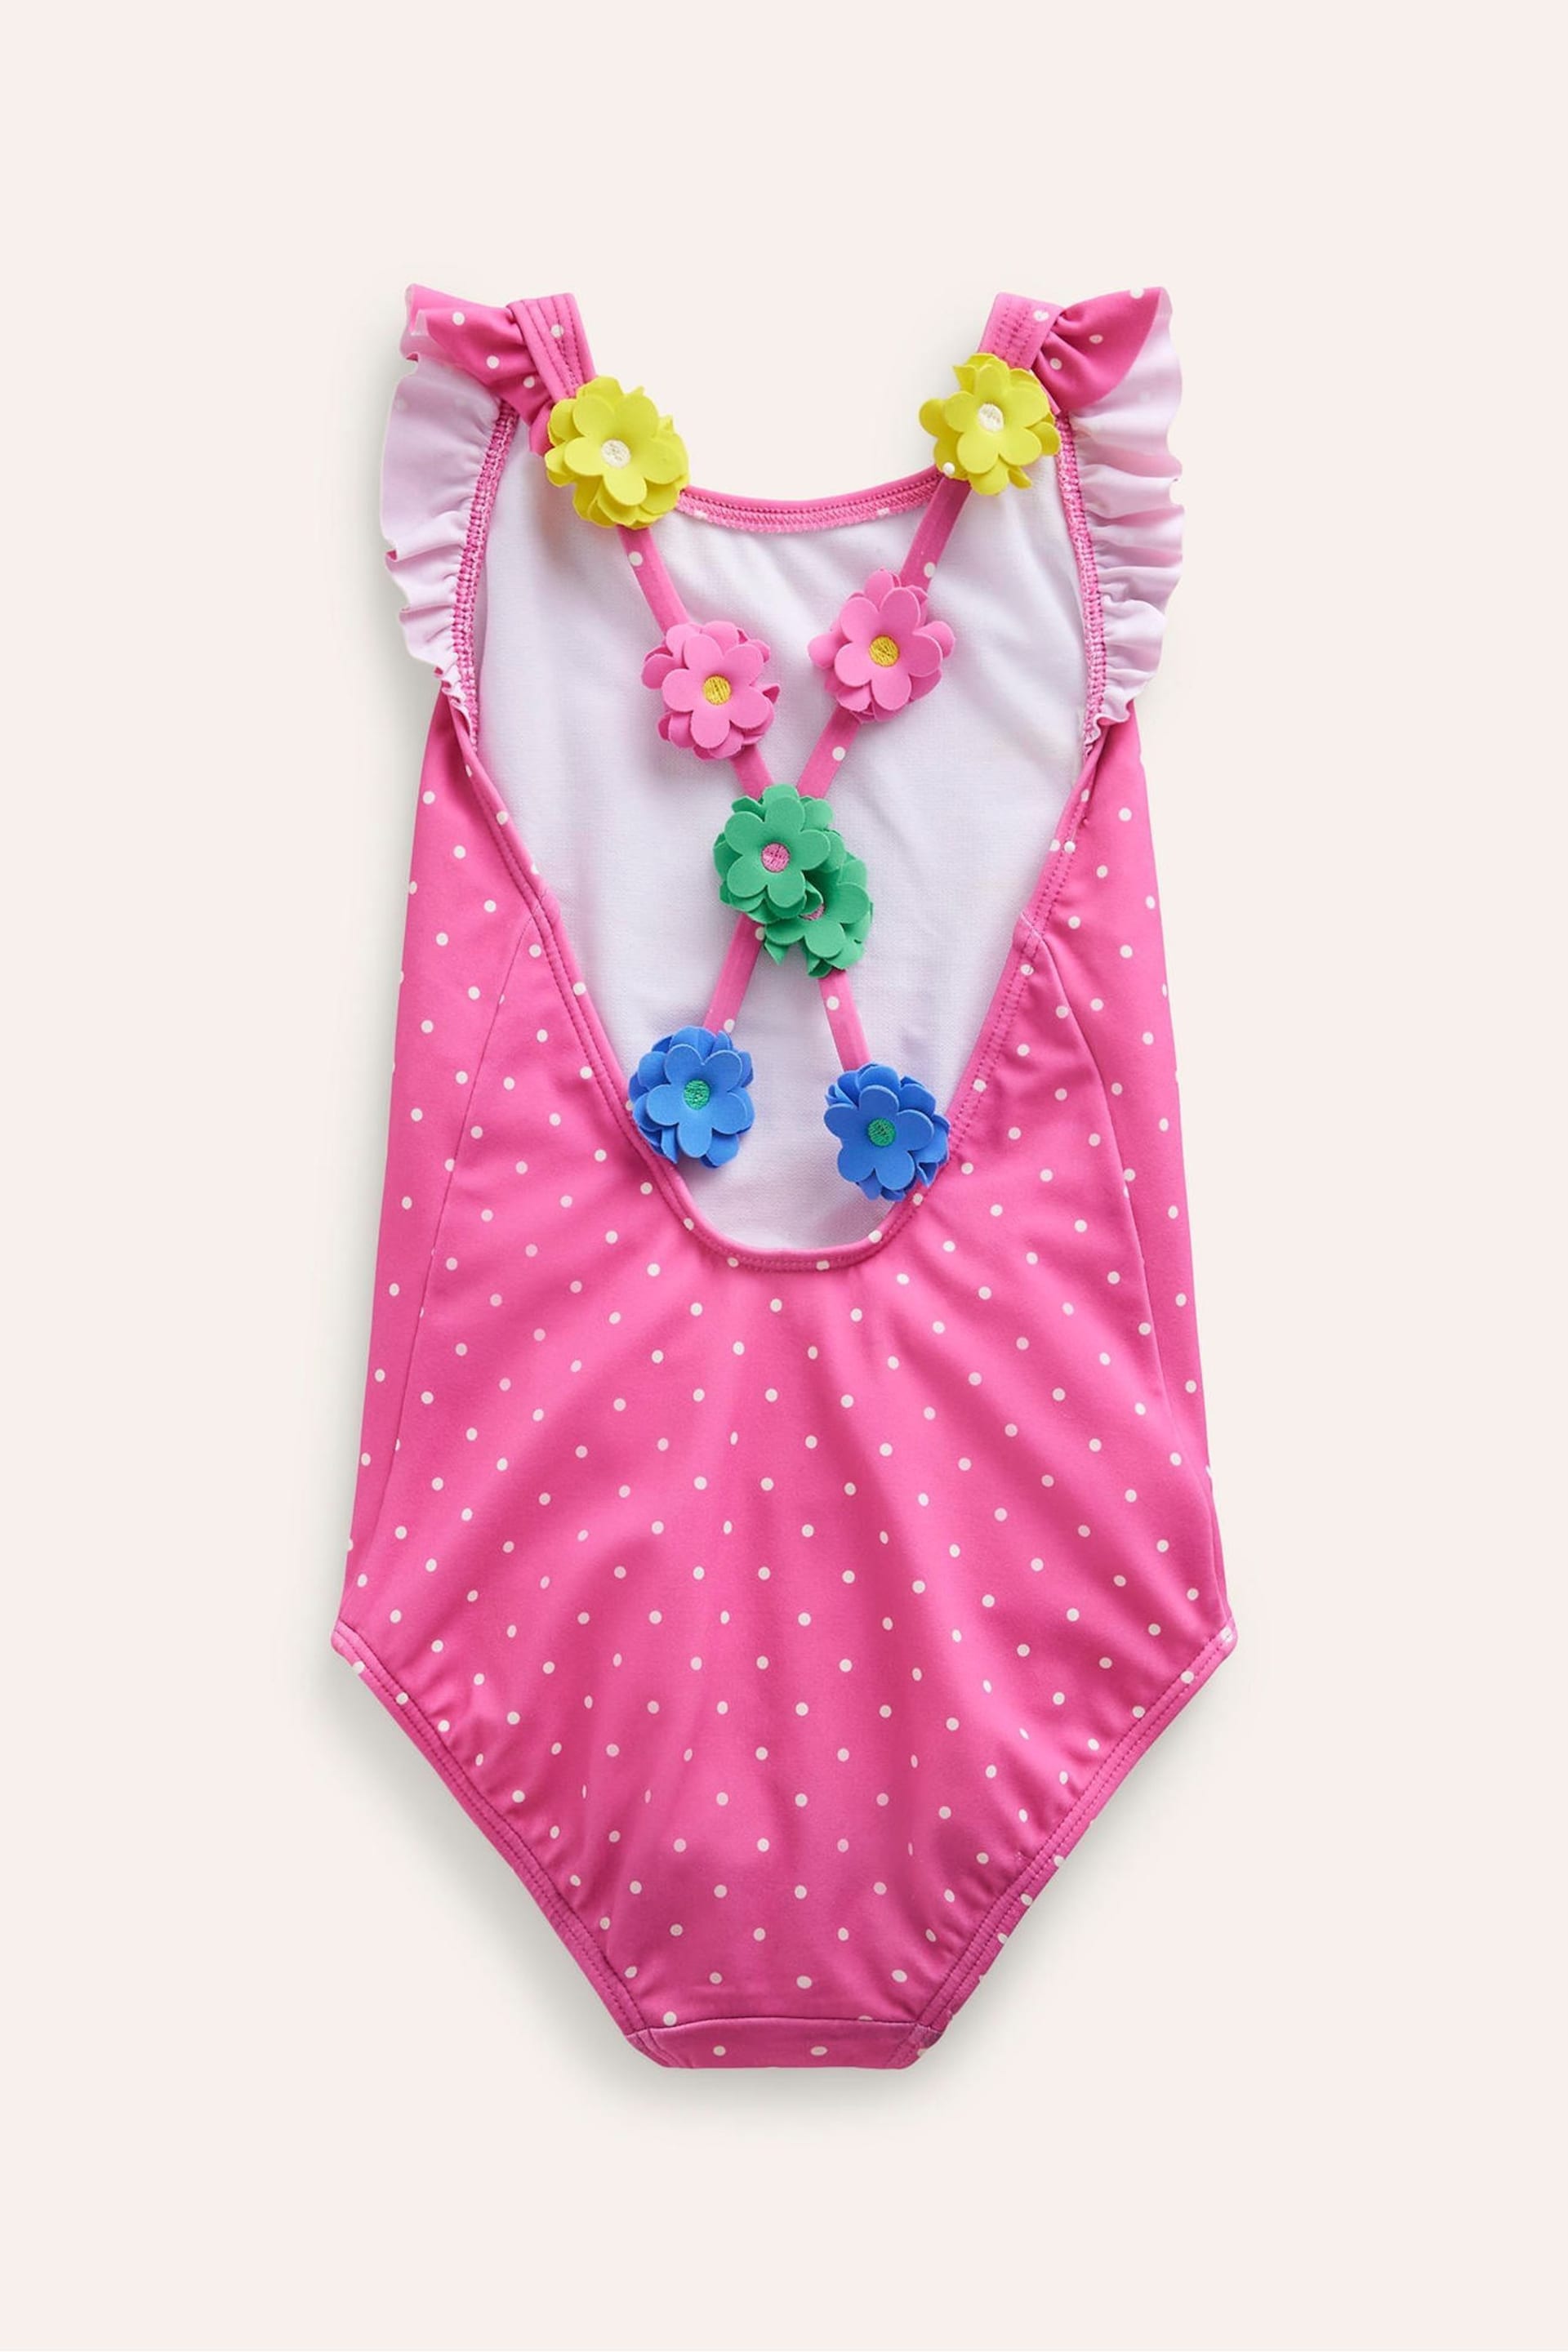 Boden Pink Fun Appliqué Swimsuit - Image 2 of 4